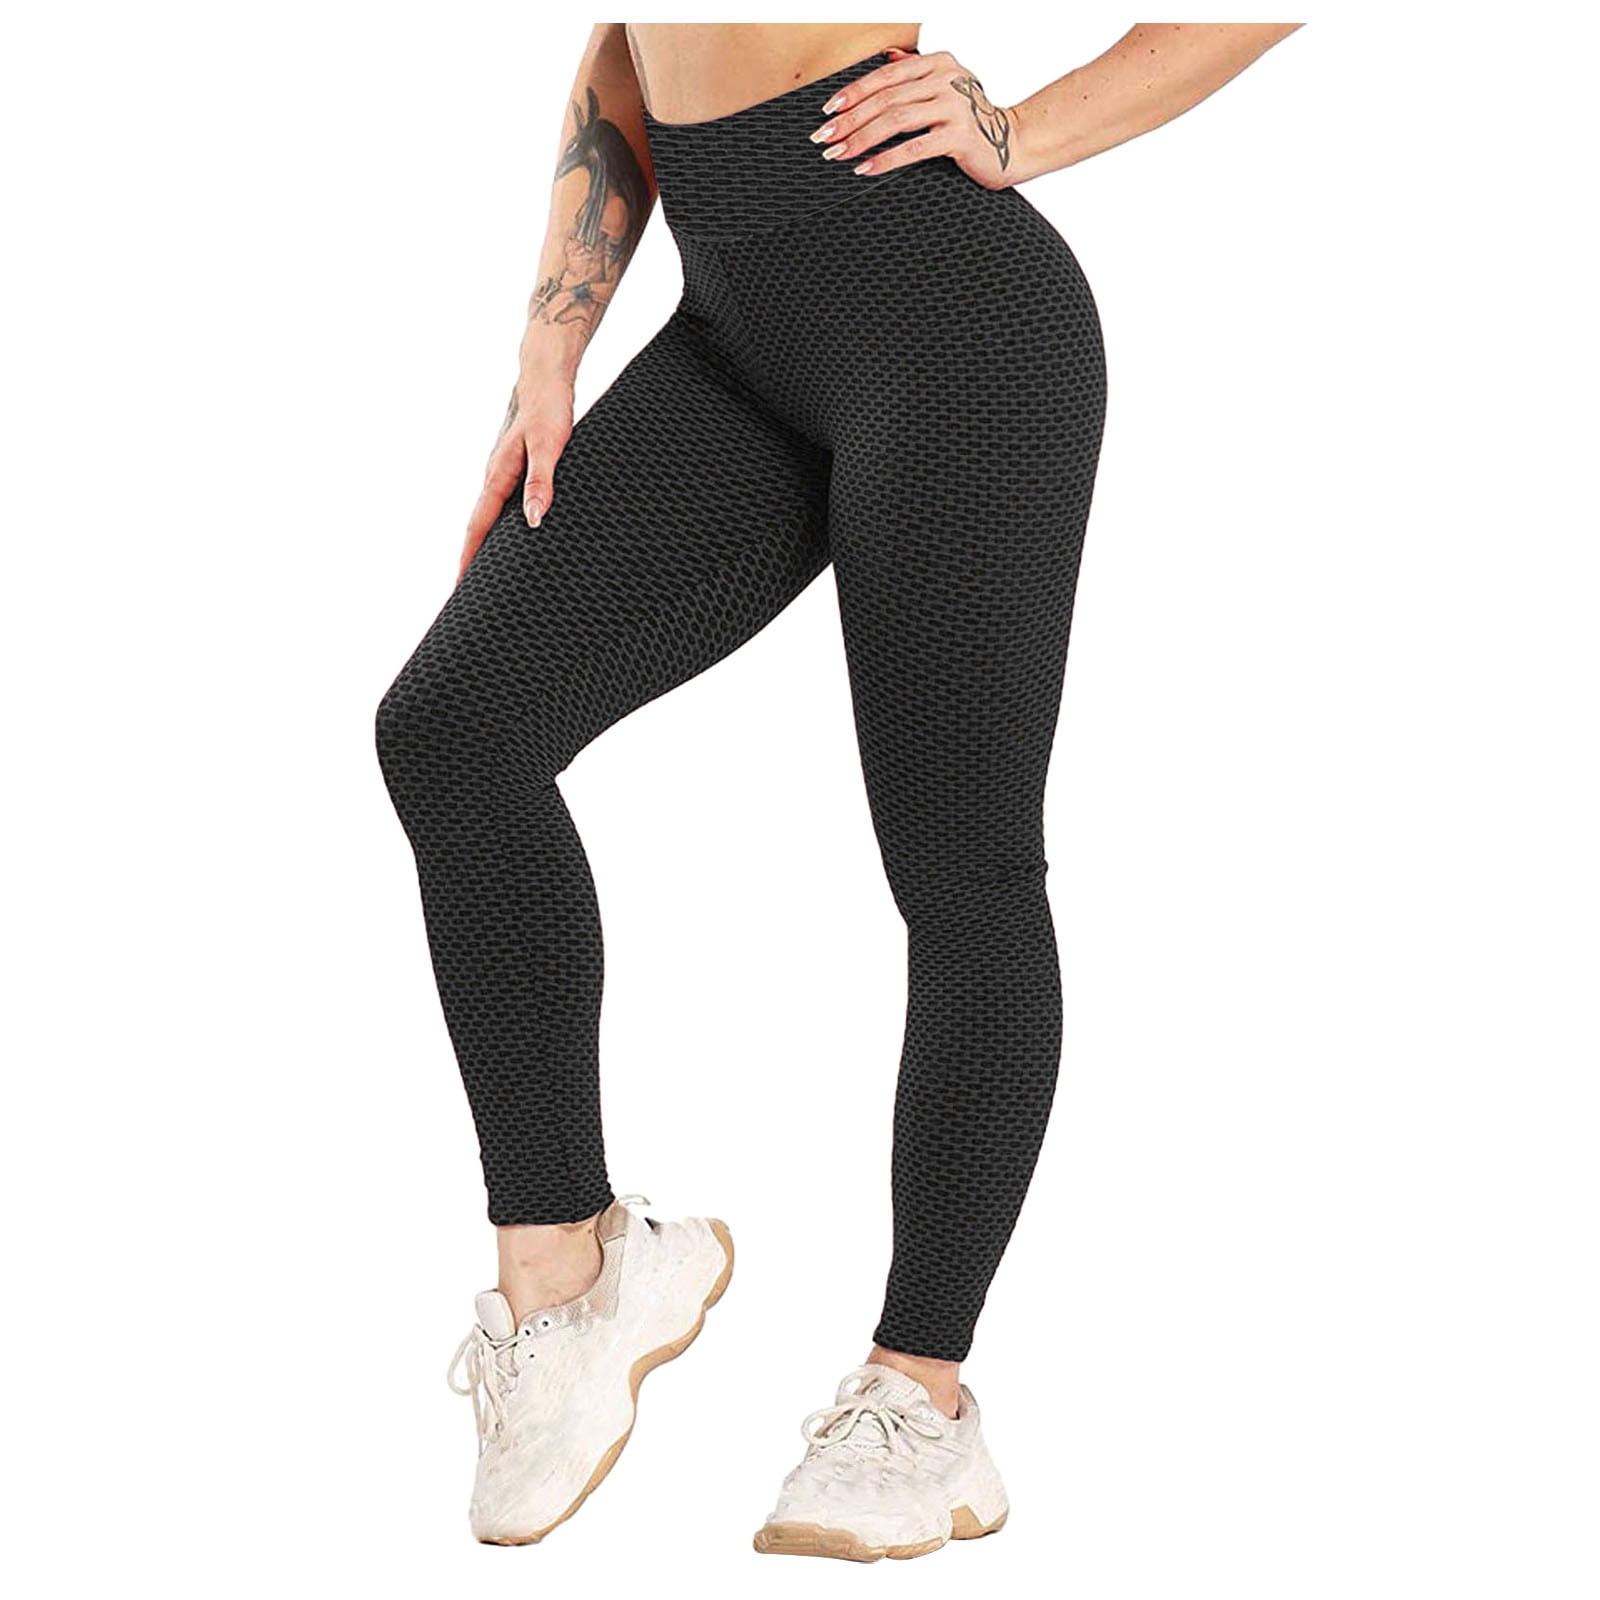 KaLI_store Work Pants for Women Leggings for Women Non See Through-Workout  High Waisted Tummy Control Running Yoga Pants Black,M 